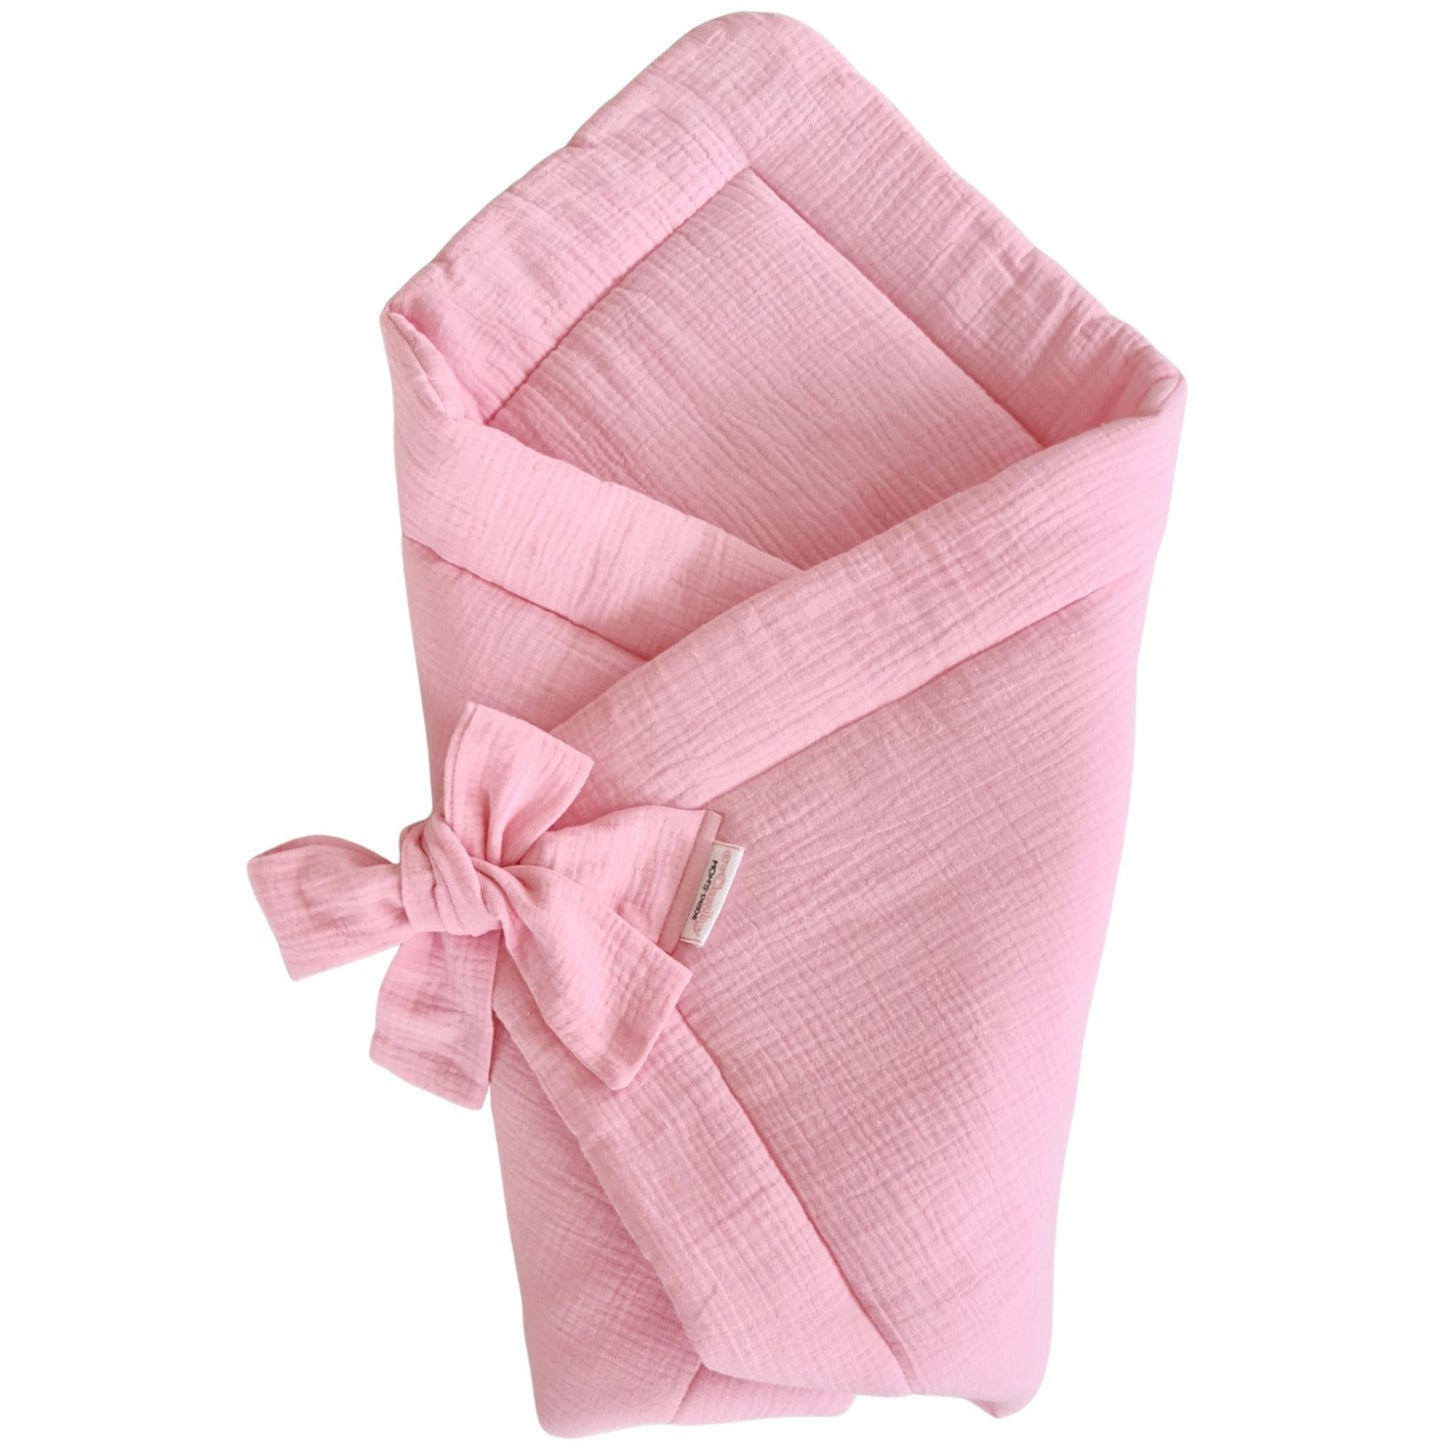 evcushy swaddle blanket for infants pink made of muslin cotton